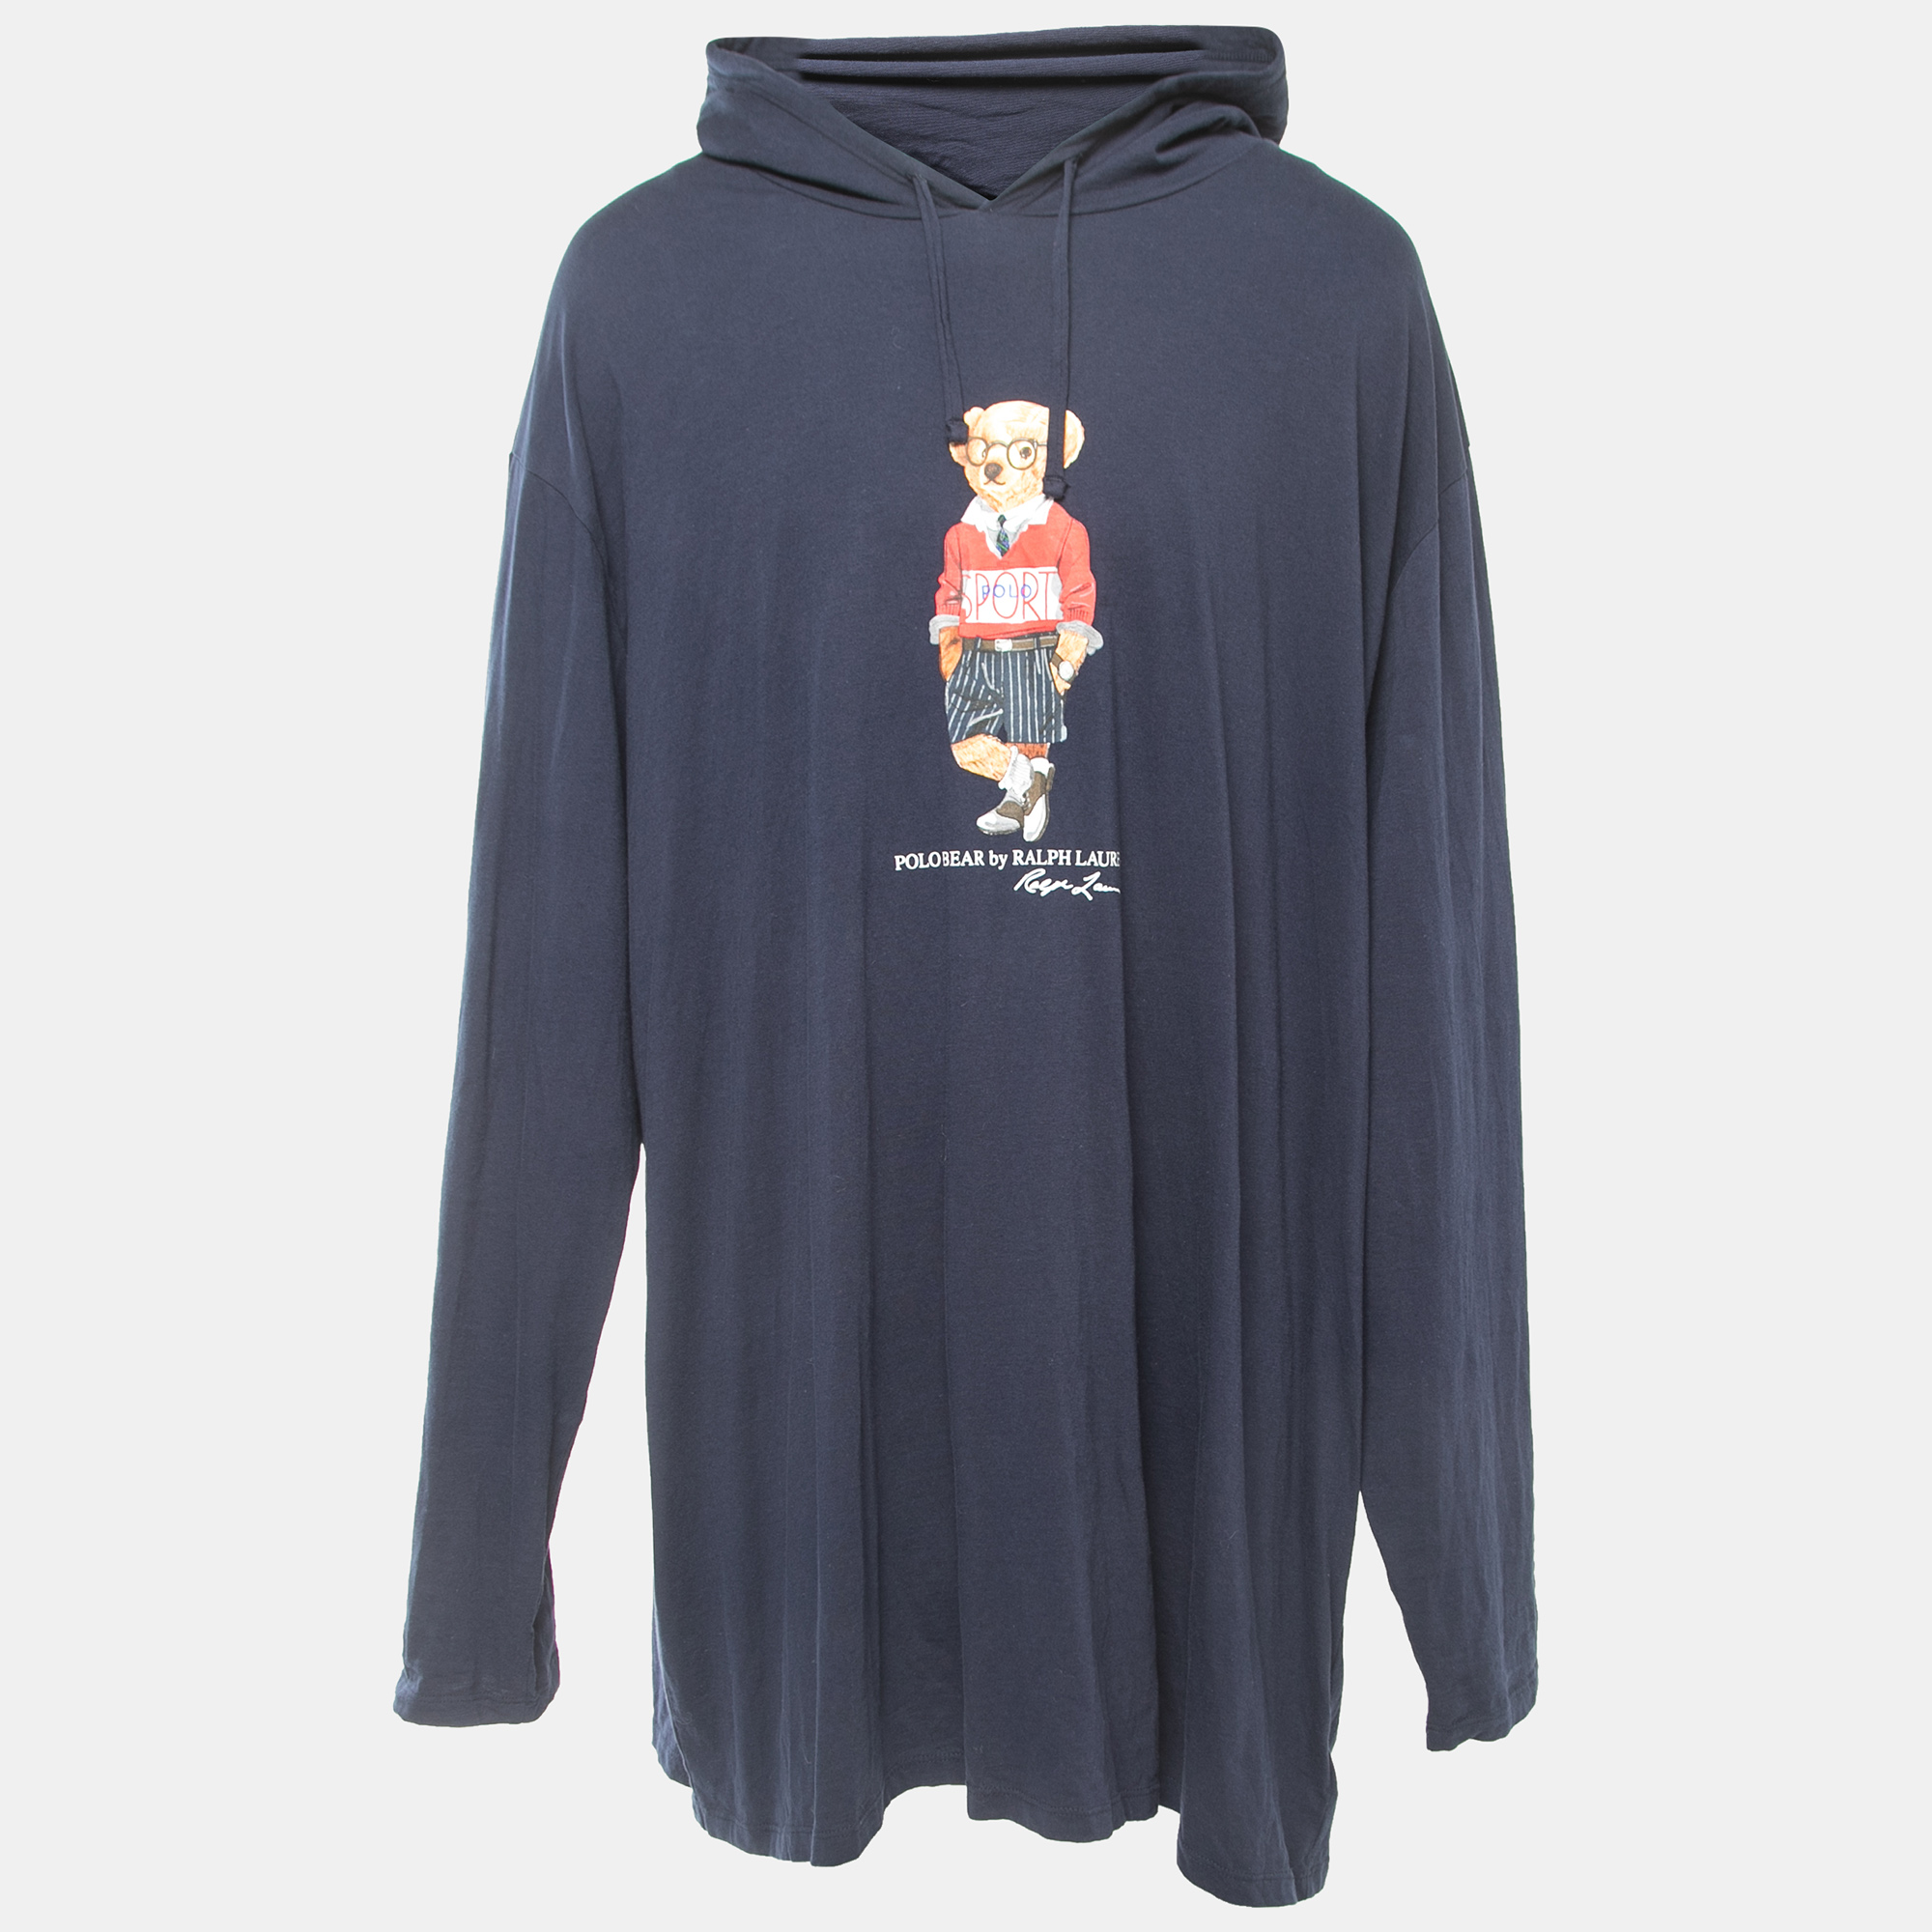 The Polo Ralph Lauren hoodie is a stylish and comfortable piece of clothing. It features a classic navy blue color with the iconic Ralph Lauren logo printed prominently on the front. Made from soft and breathable cotton this hoodie offers both fashion and comfort for casual wear.